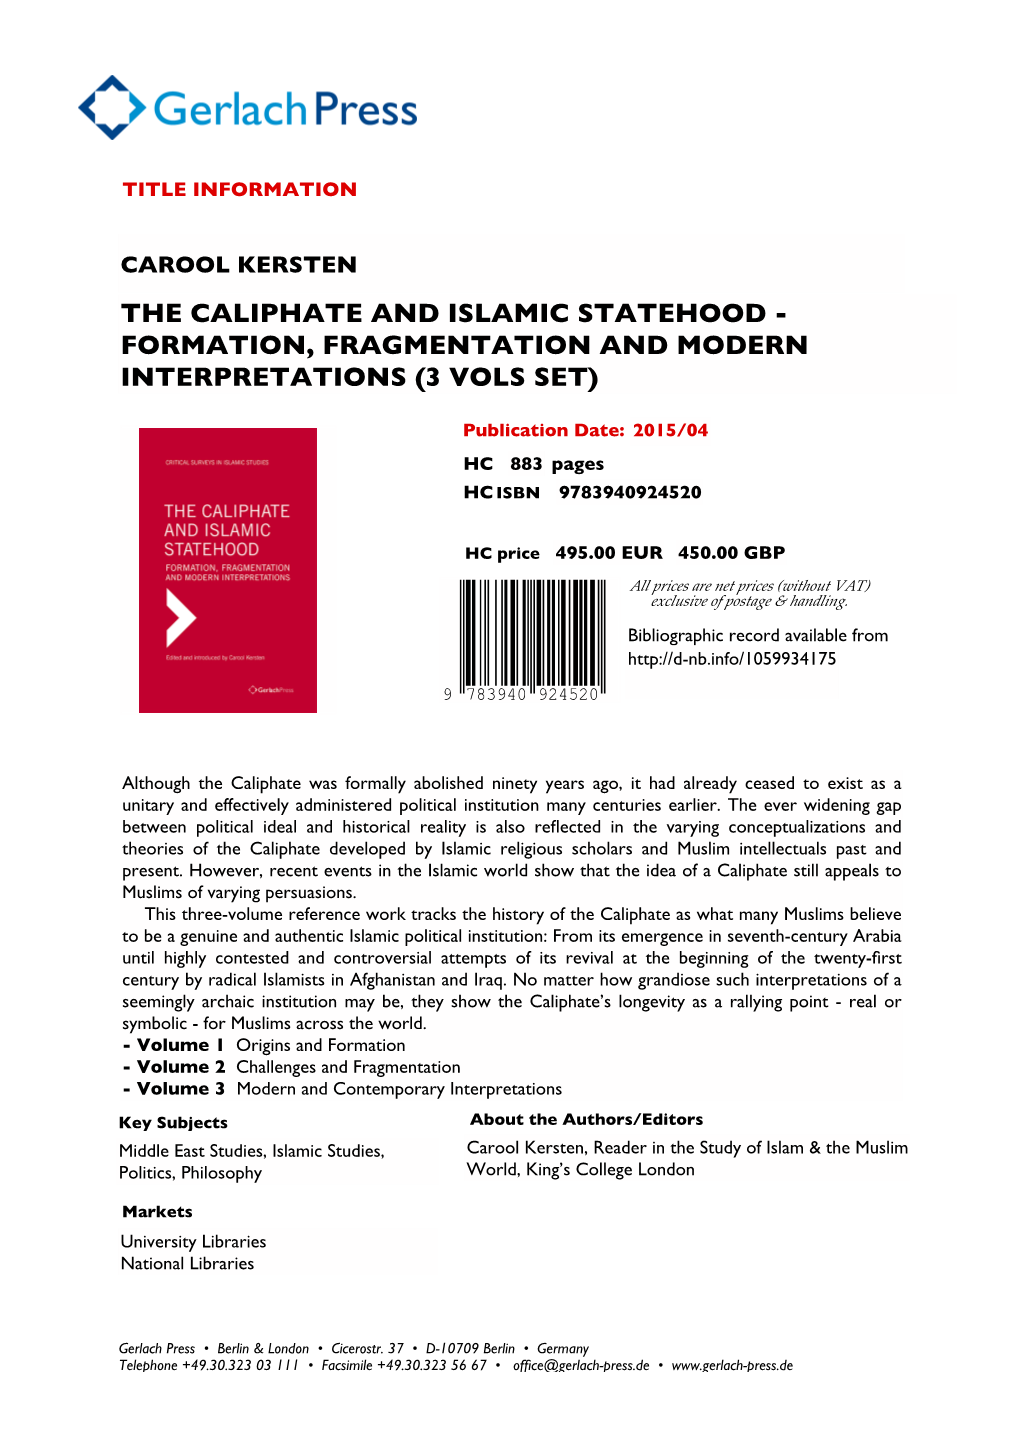 The Caliphate and Islamic Statehood - Formation, Fragmentation and Modern Interpretations (3 Vols Set)